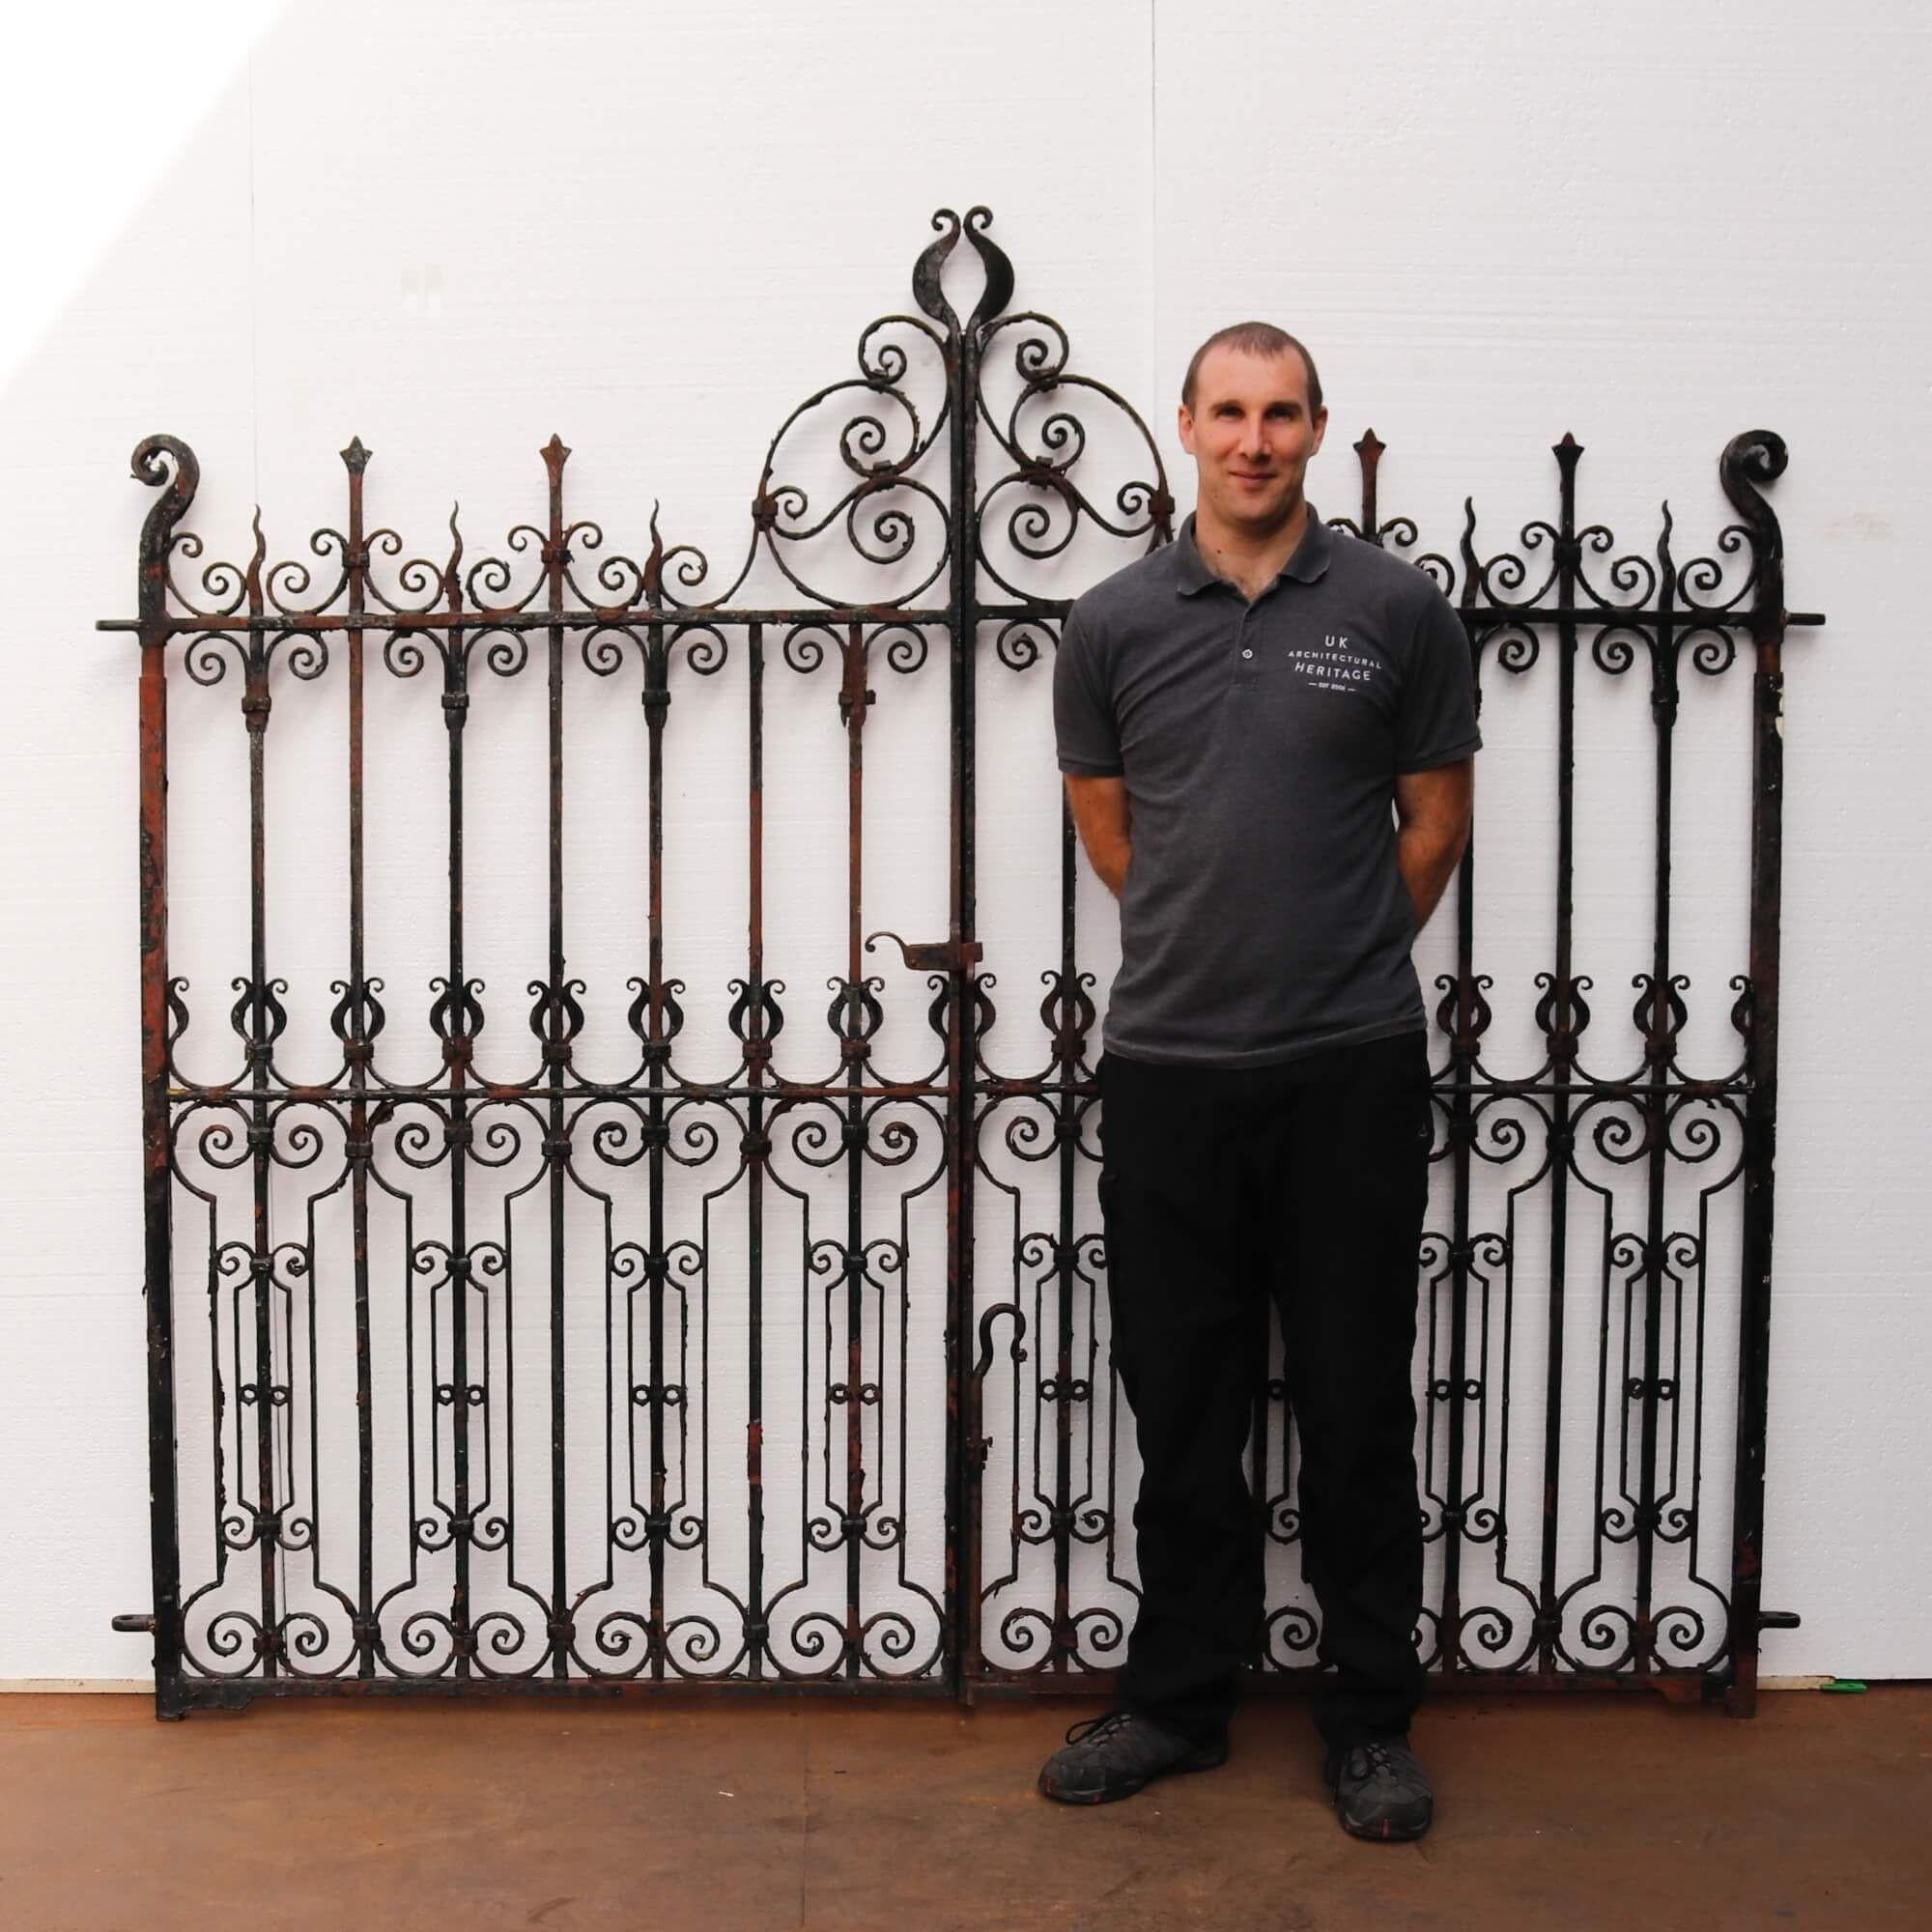 Pair of original Victorian elaborately crafted wrought iron driveway gates crafted in circa 1880. These 19th century gates do not disappoint in size and design. Rows of elongated scrolls and swirls are matched structurally with the original working